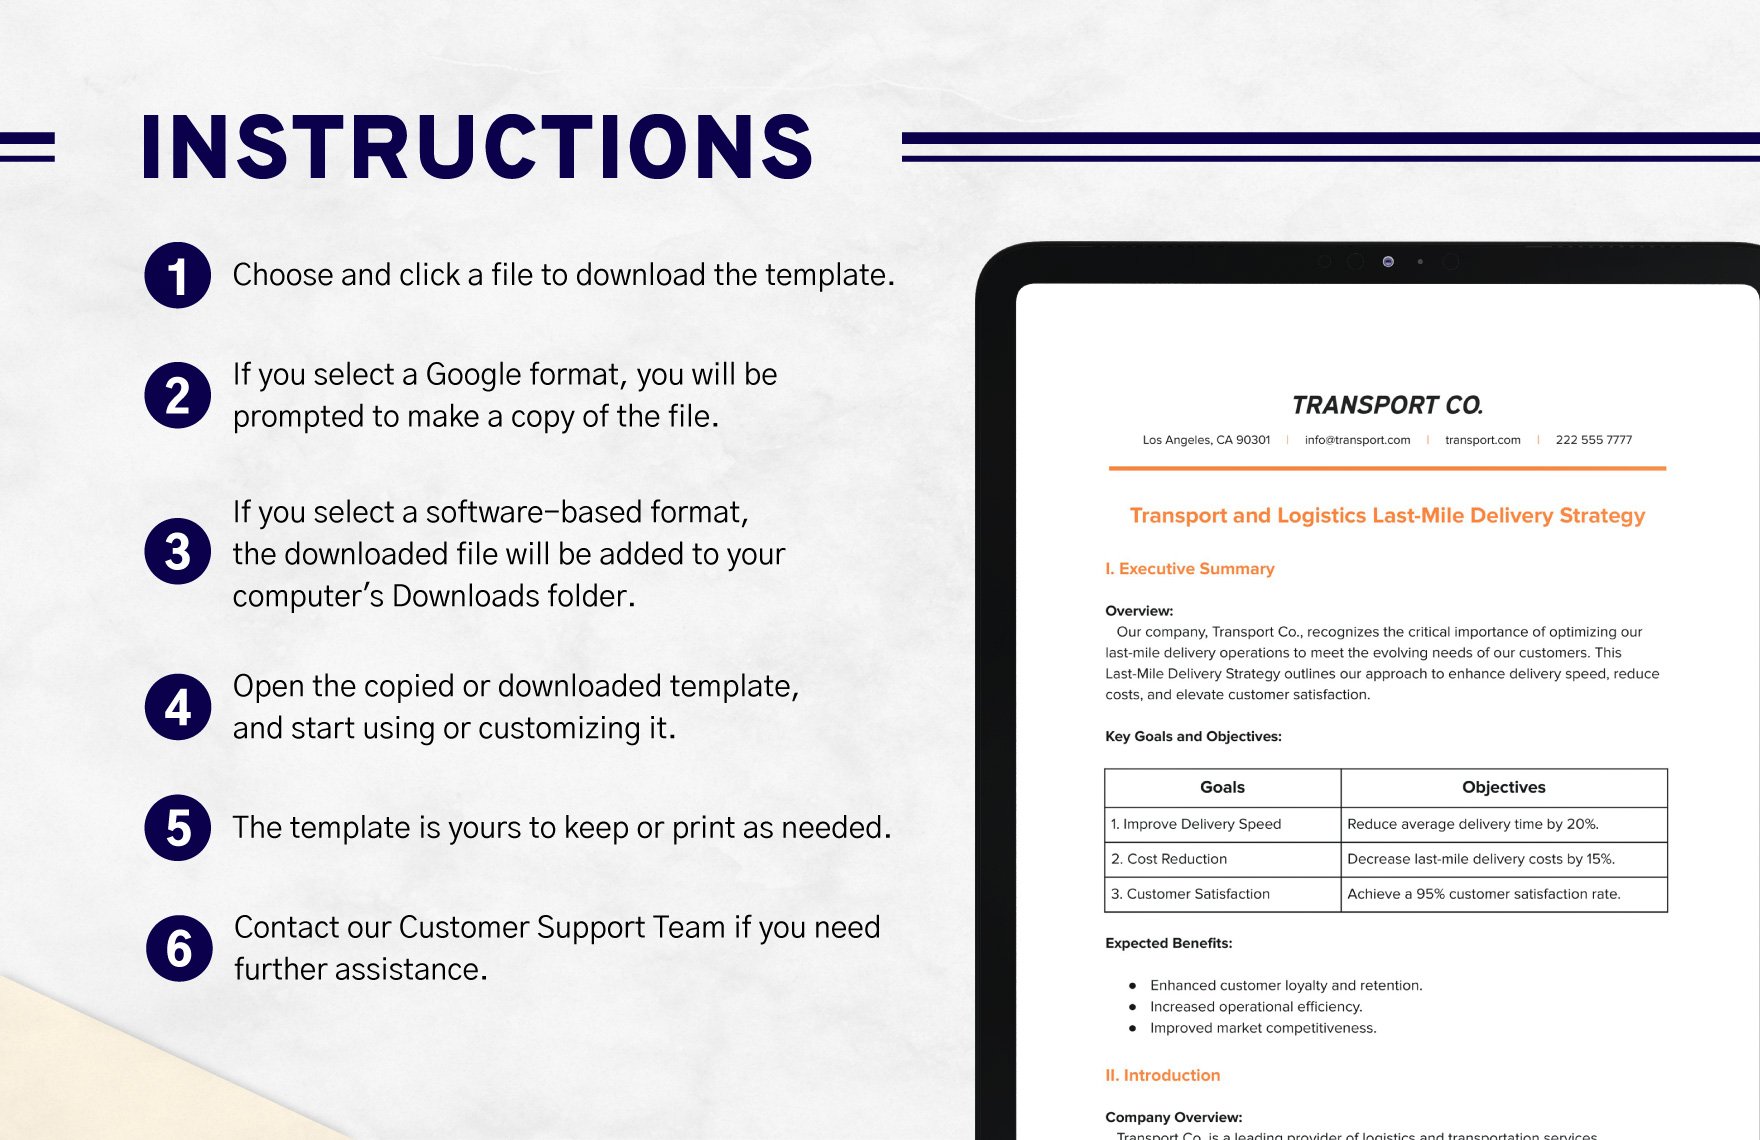 Transport and Logistics Last-Mile Delivery Strategy Template